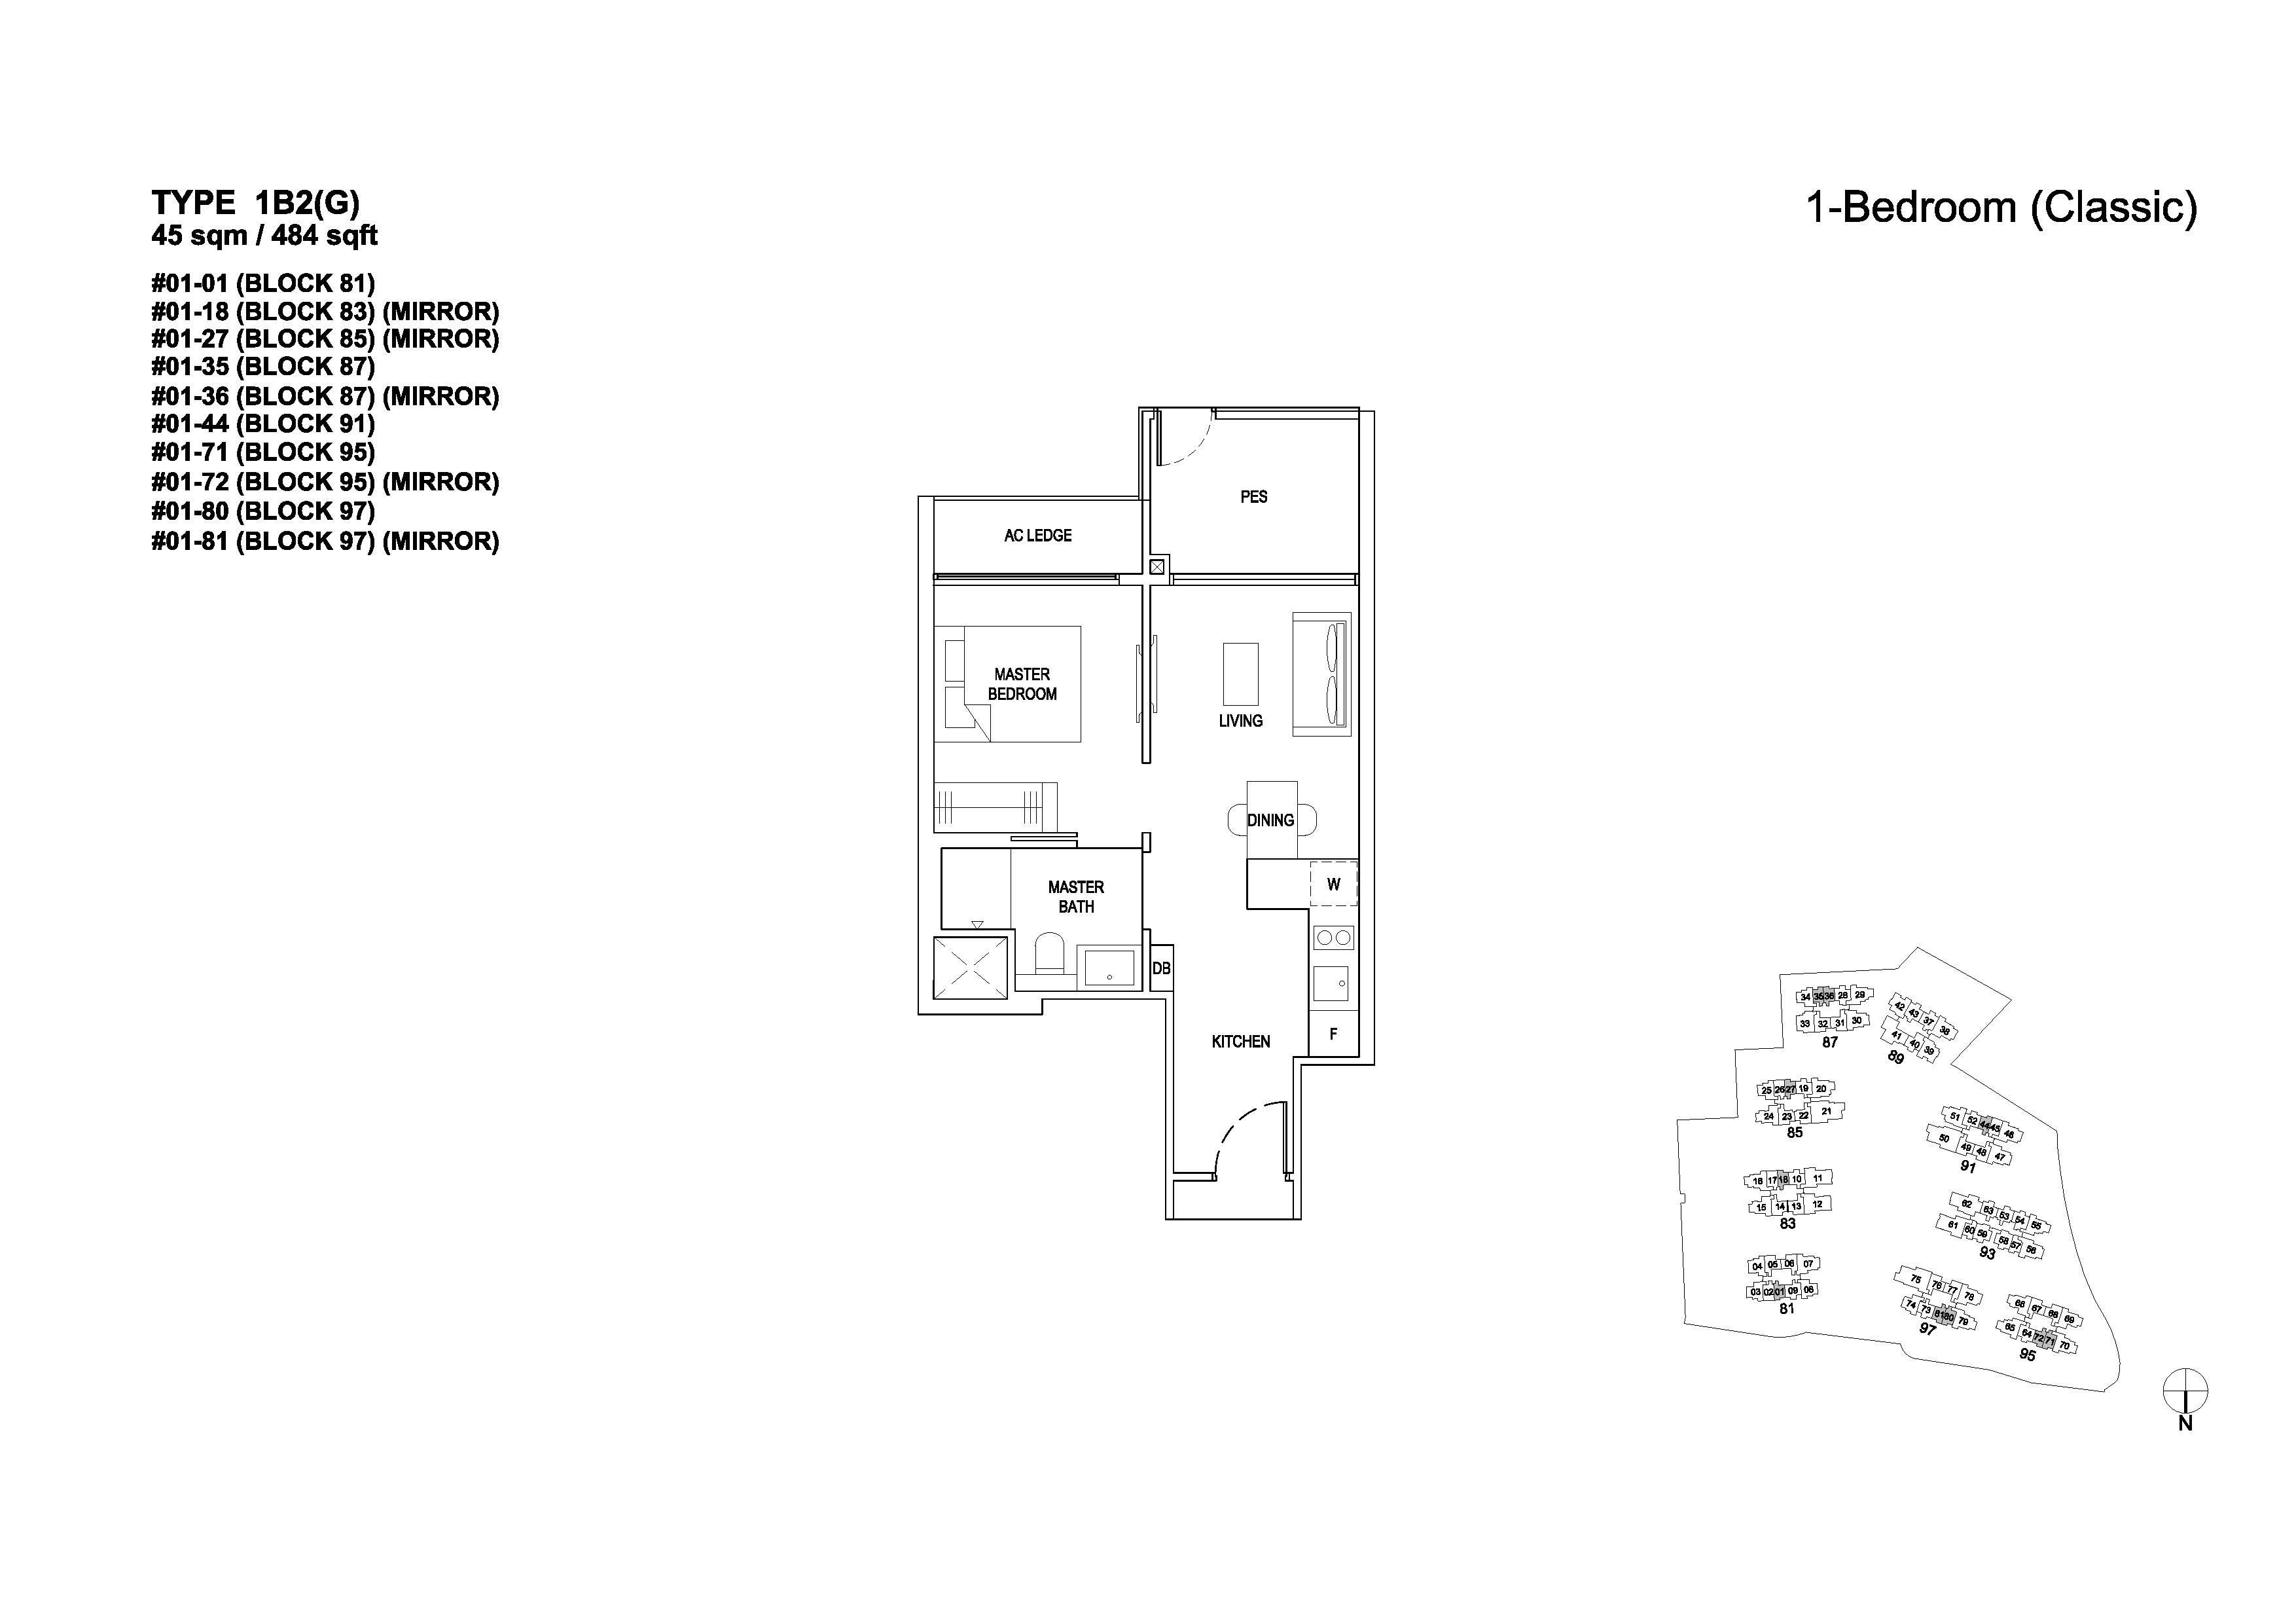 The Florence Residences 1 Bedroom Classic Type 1B2(G) Floor Plans